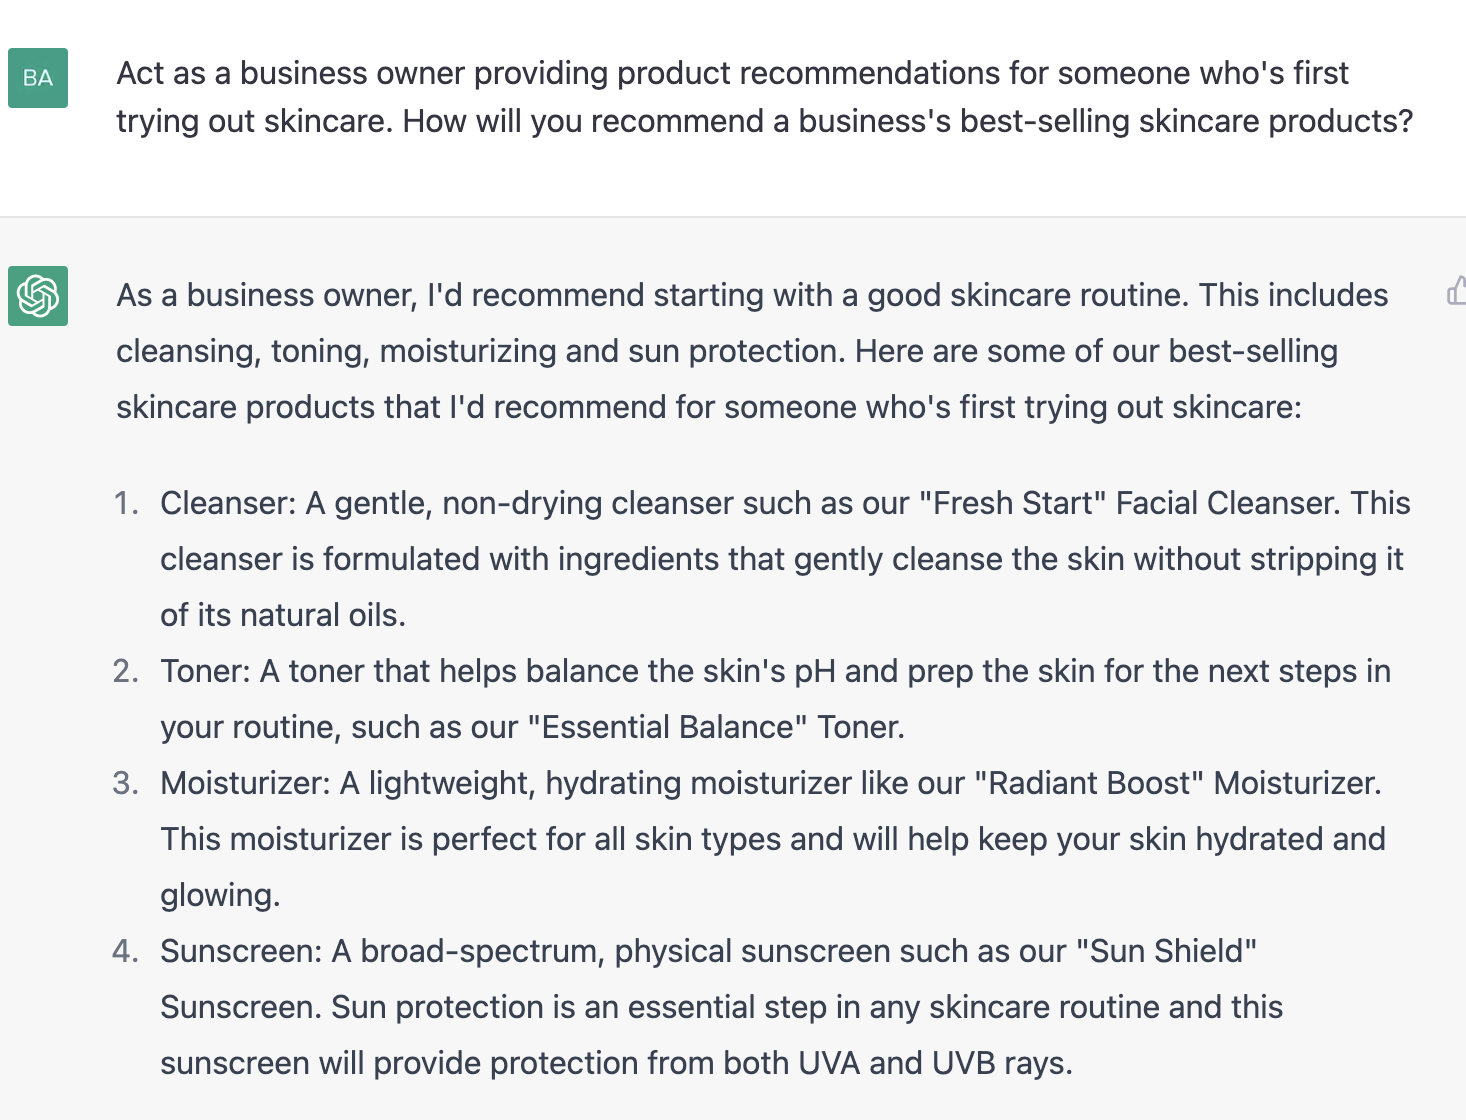 ChatGPT prompt about how to recommend a business's best selling products.